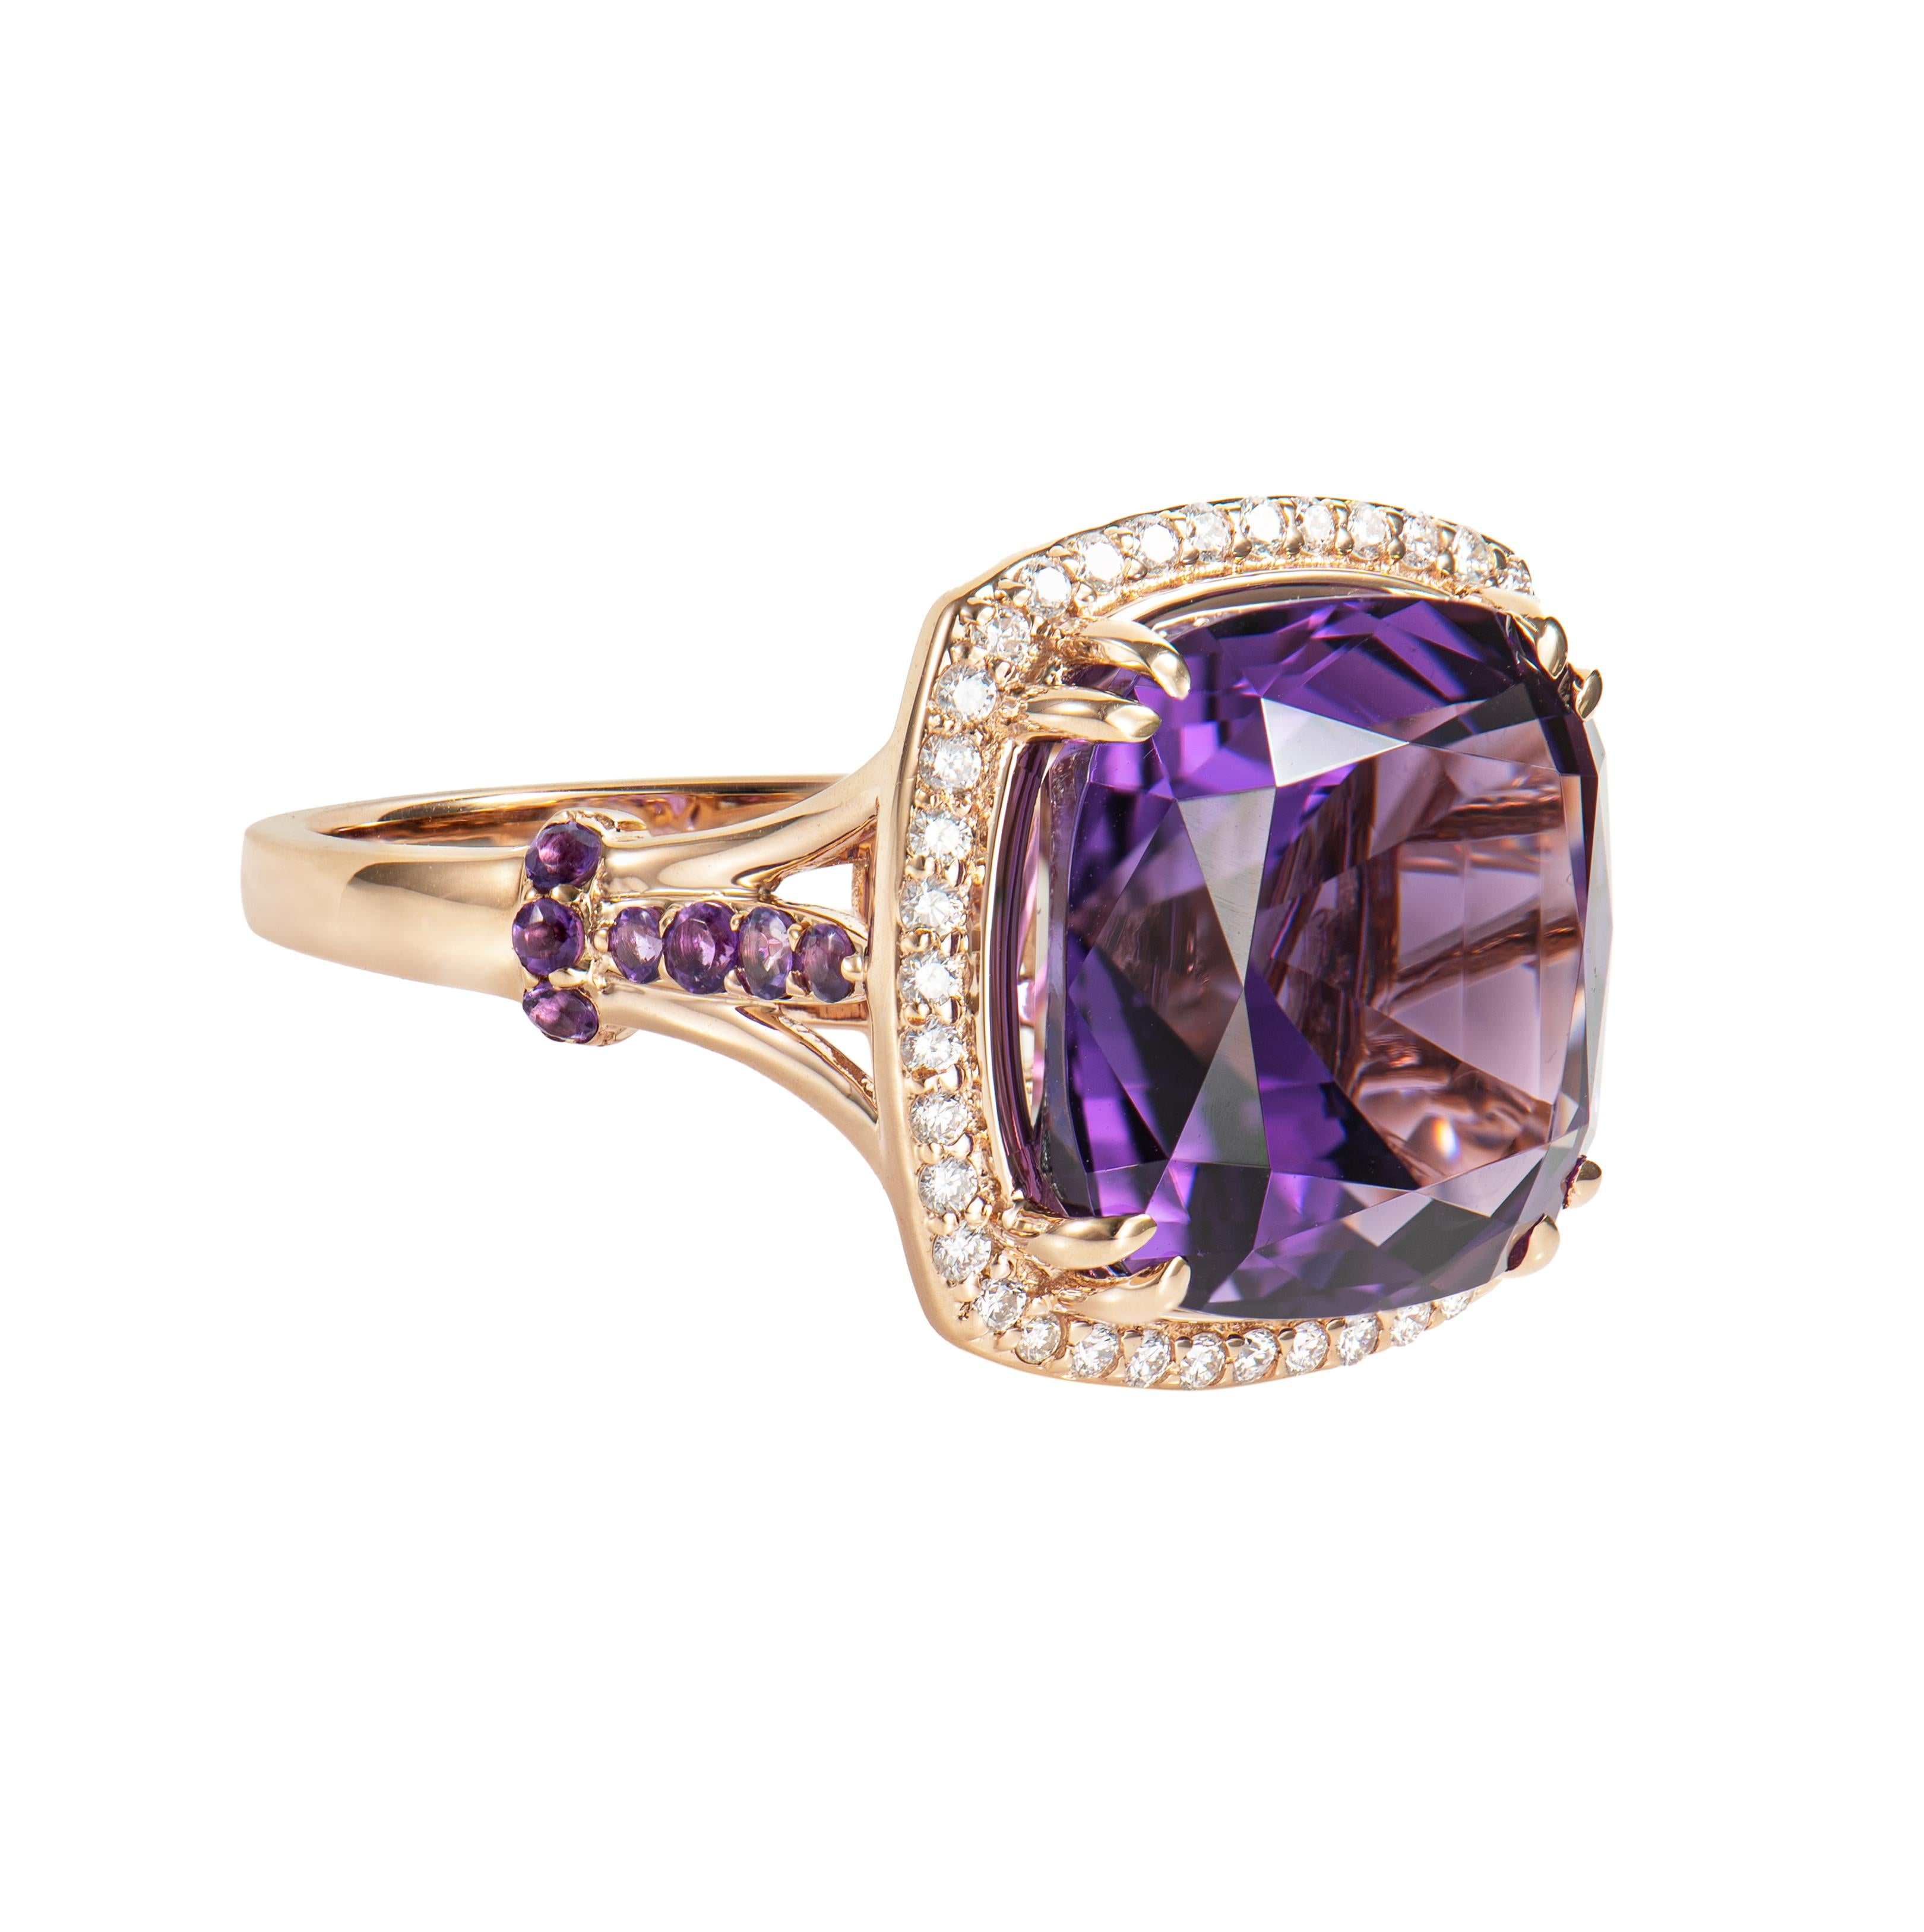 Cocktail rings are offered in a collection by Sunita Nahata. These rings were only worn on special occasions and weren't meant to be worn every day. The Cocktail ring collection by Precious Stones Like Garnet, London Blue Topaz, and Amethyst is